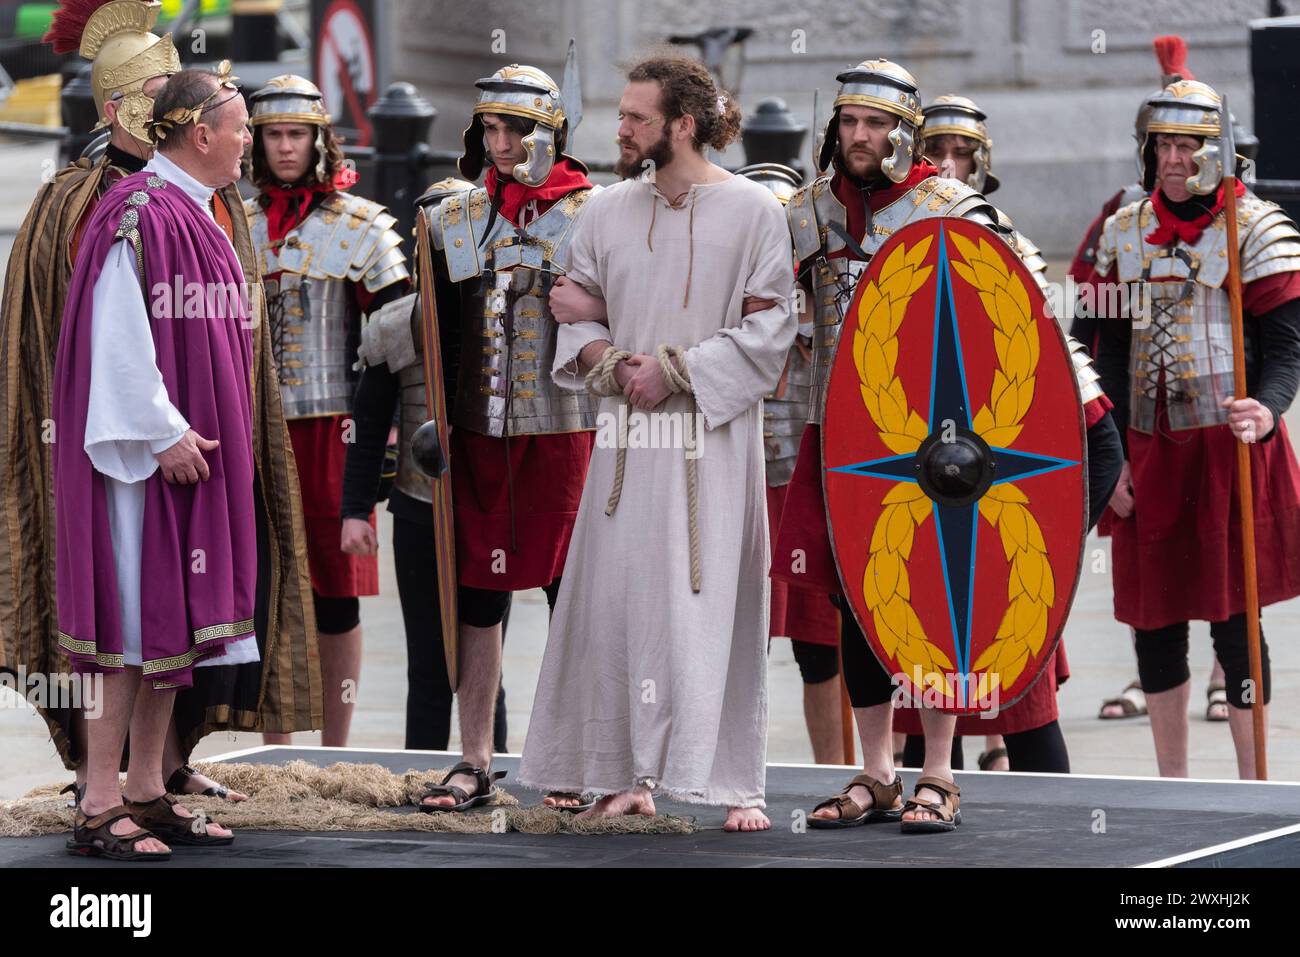 The Passion of Christ open air play by Wintershall in Trafalgar Square, London, on Easter Good Friday. Christ detained by Romans Stock Photo